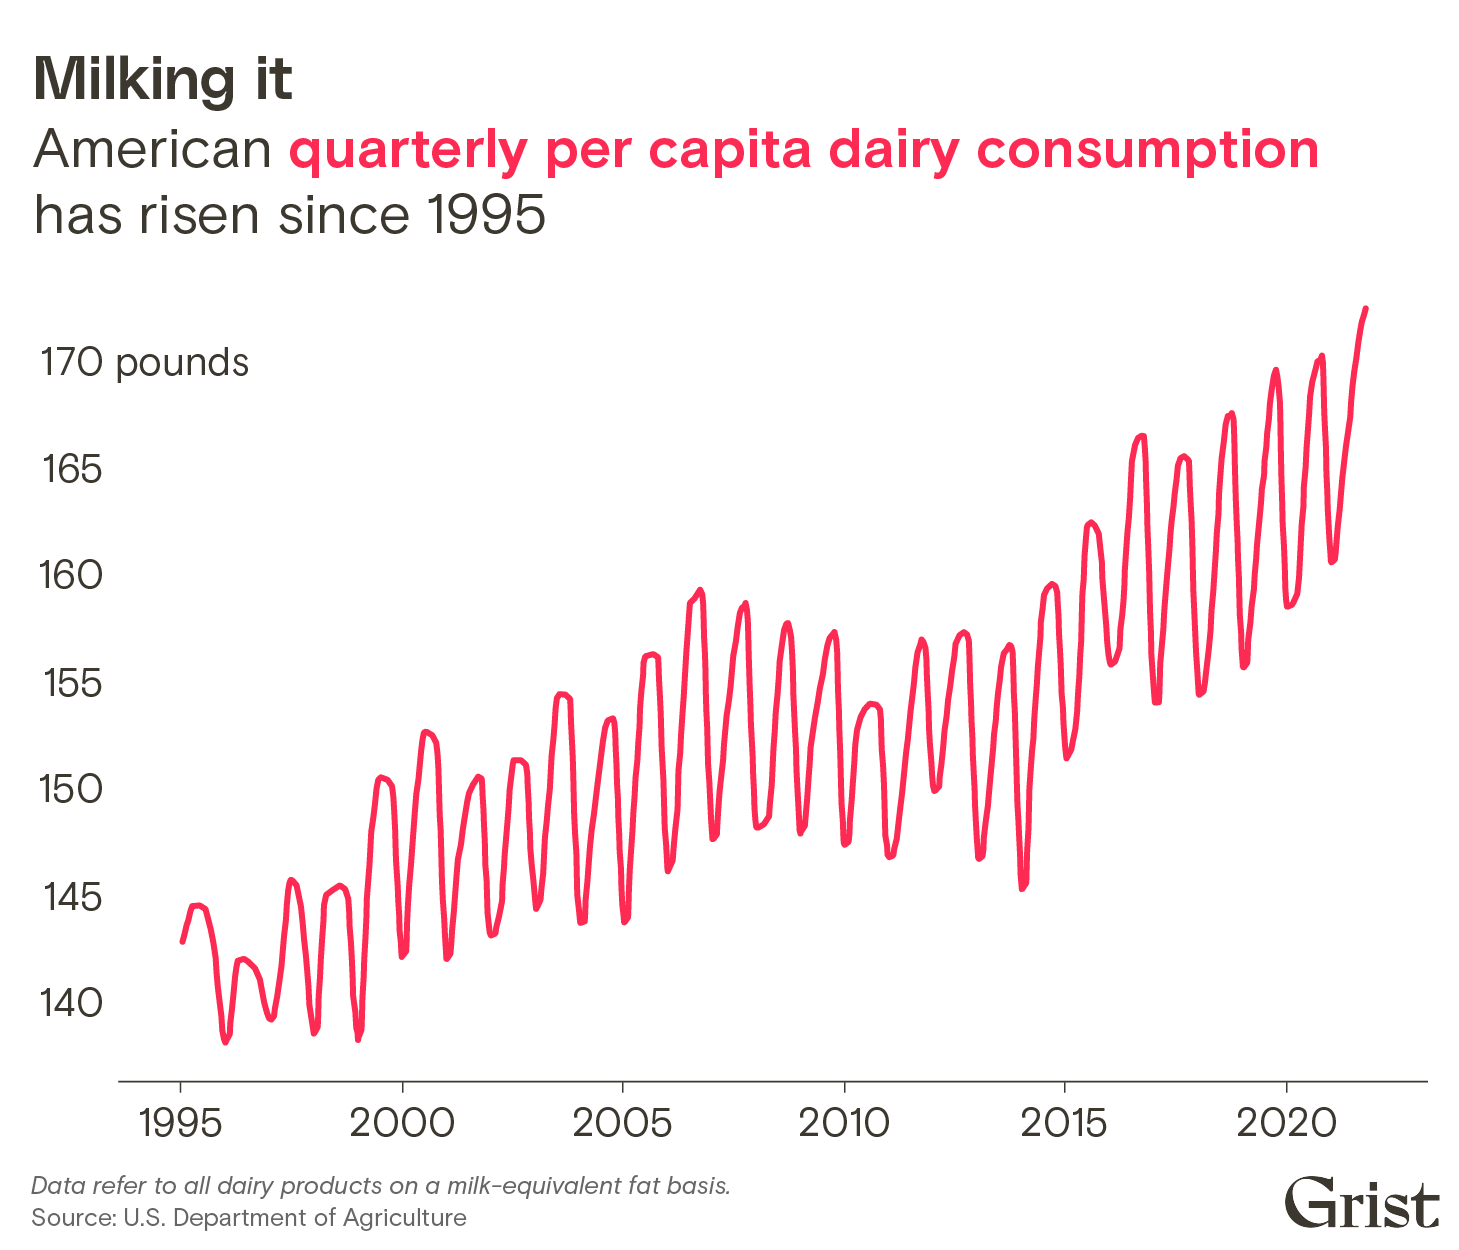 A line chart showing U.S. quarterly per capita dairy consumption between 1995 and 2021. Quarterly consumption of milk-equivalent fat has risen from approximately 140 pounds to approximately 170 pounds.